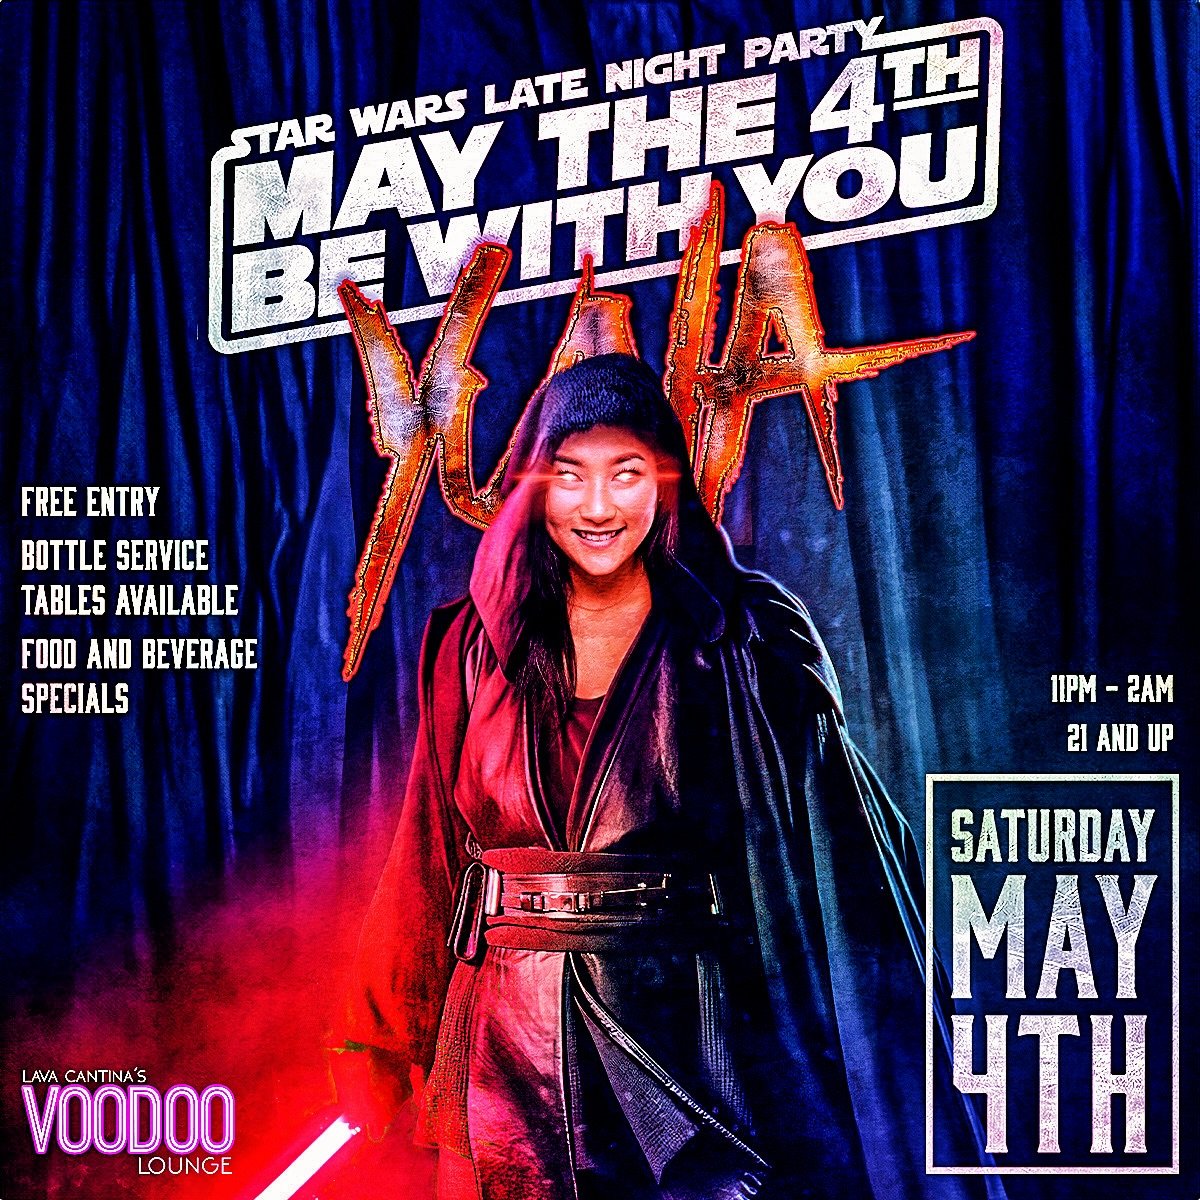 🔥Late Night Star Wars Pop Up Party with DJ Yuna - Saturday, May 4th in Lava Cantina&rsquo;s Voodoo Lounge @lavacantinatc from 11pm - 2am!🔥

👀THIS EVENT IS 21+👀
🎟️NO TICKETS NEEDED!!!🎟️

💀Free entry, bottle service tables available, food and be